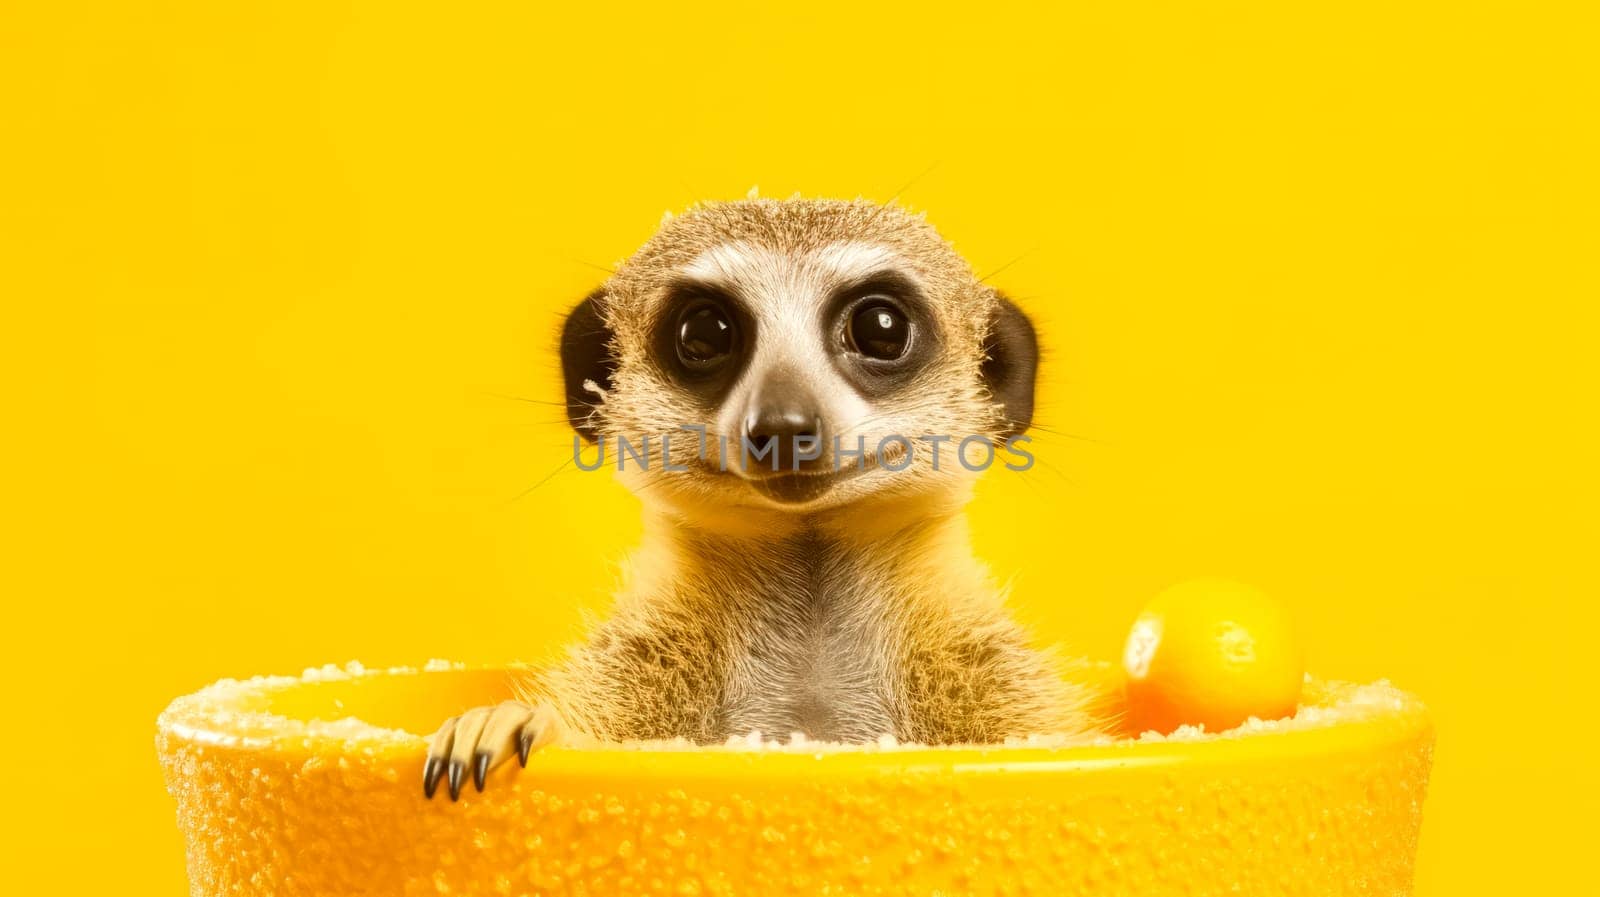 A charming meerkat enjoys a bubbly bath in a bathtub against a vibrant yellow background, adding a playful touch to this adorable illustration.